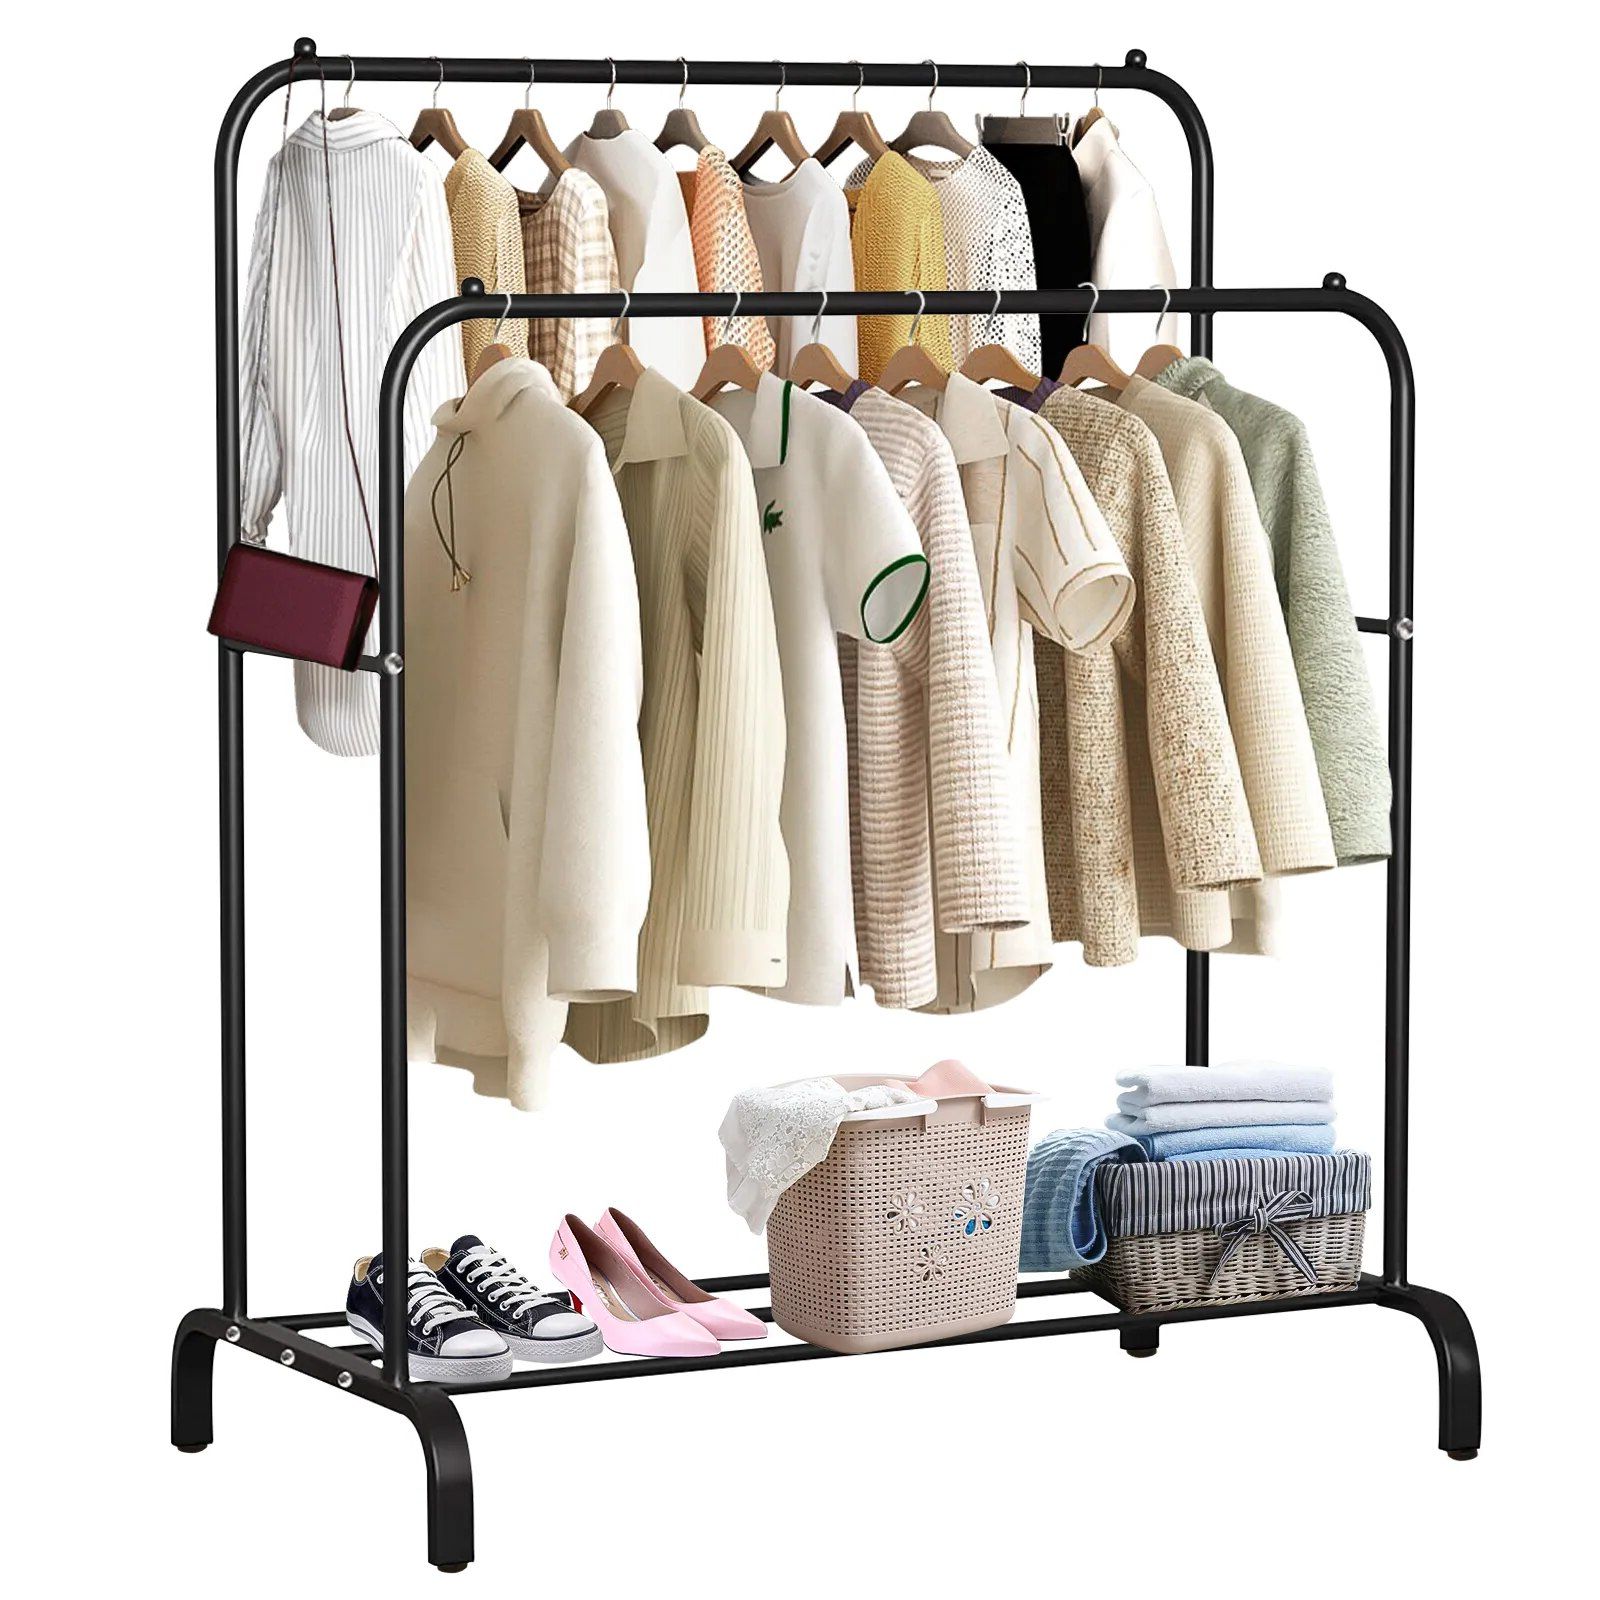 Voilamart Double Hanging Rails For Clothes Heavy Duty Garment Rail Free  Standing Metal Clothing Rack Commercial Coat Rail – Drying Racks –  Aliexpress With Regard To Double Hanging Rail Wardrobes (View 11 of 20)